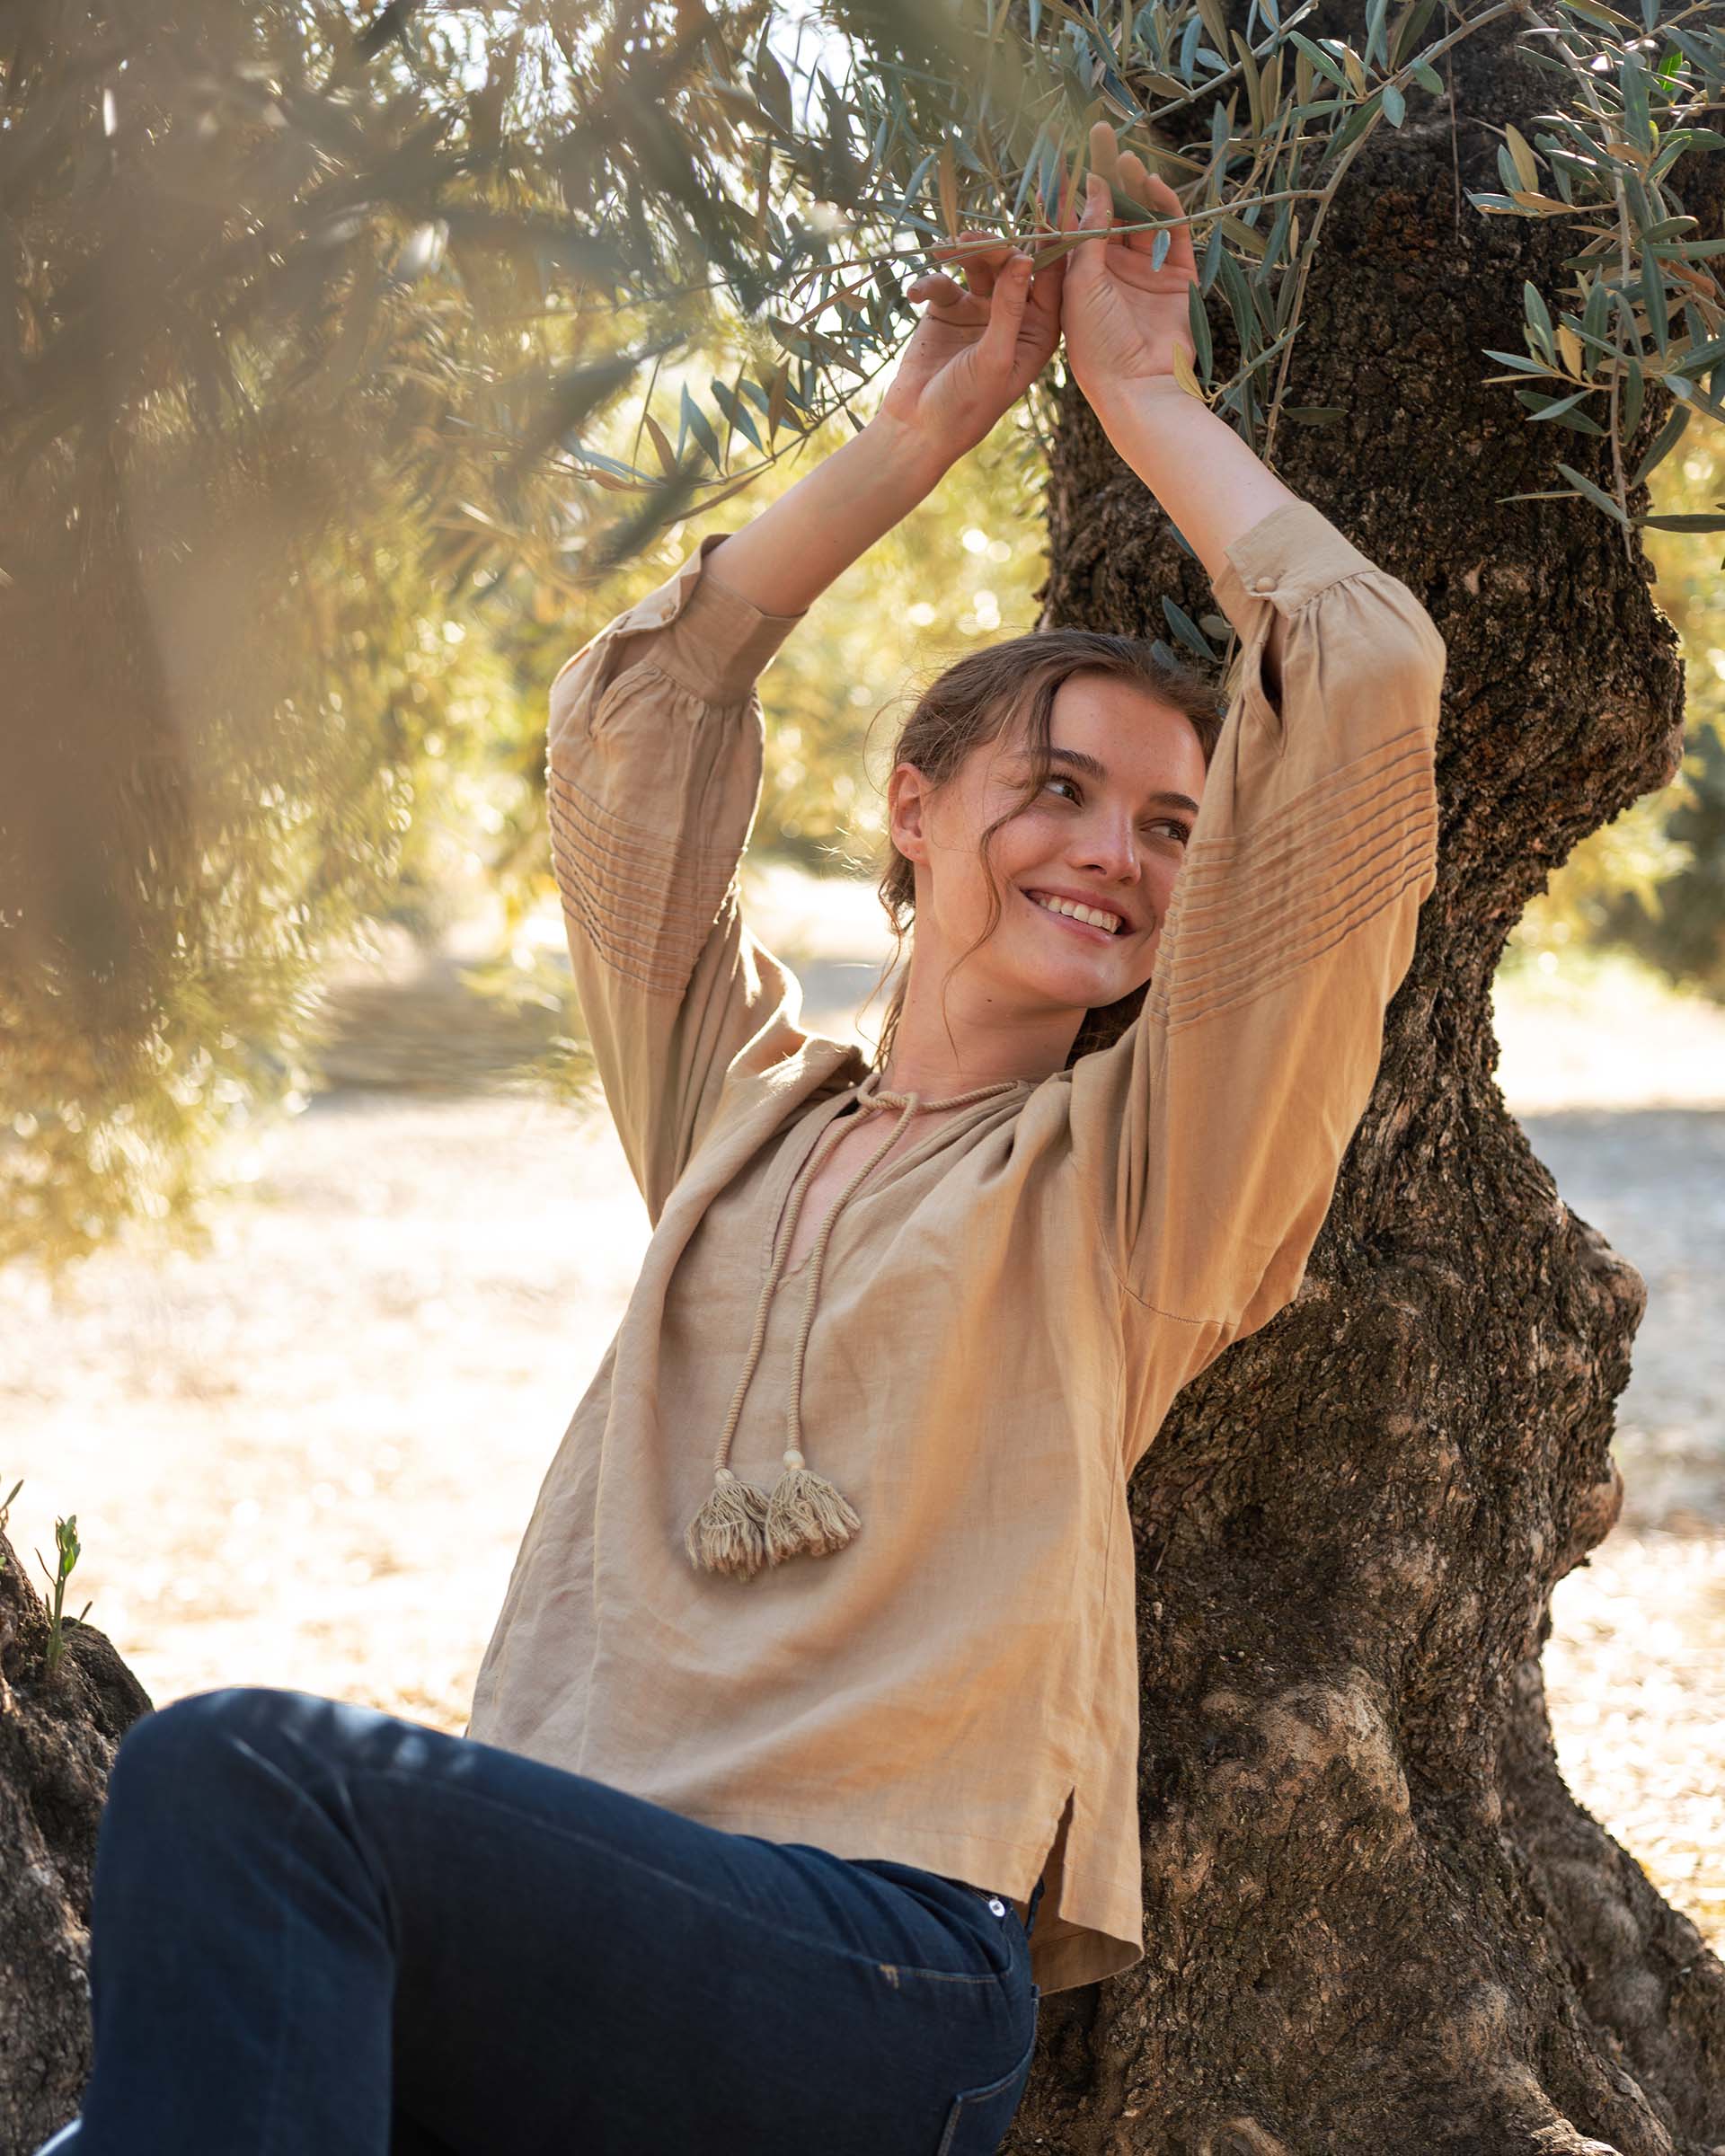 Female wearing blue jeans and beige blouse leans against an olive tree